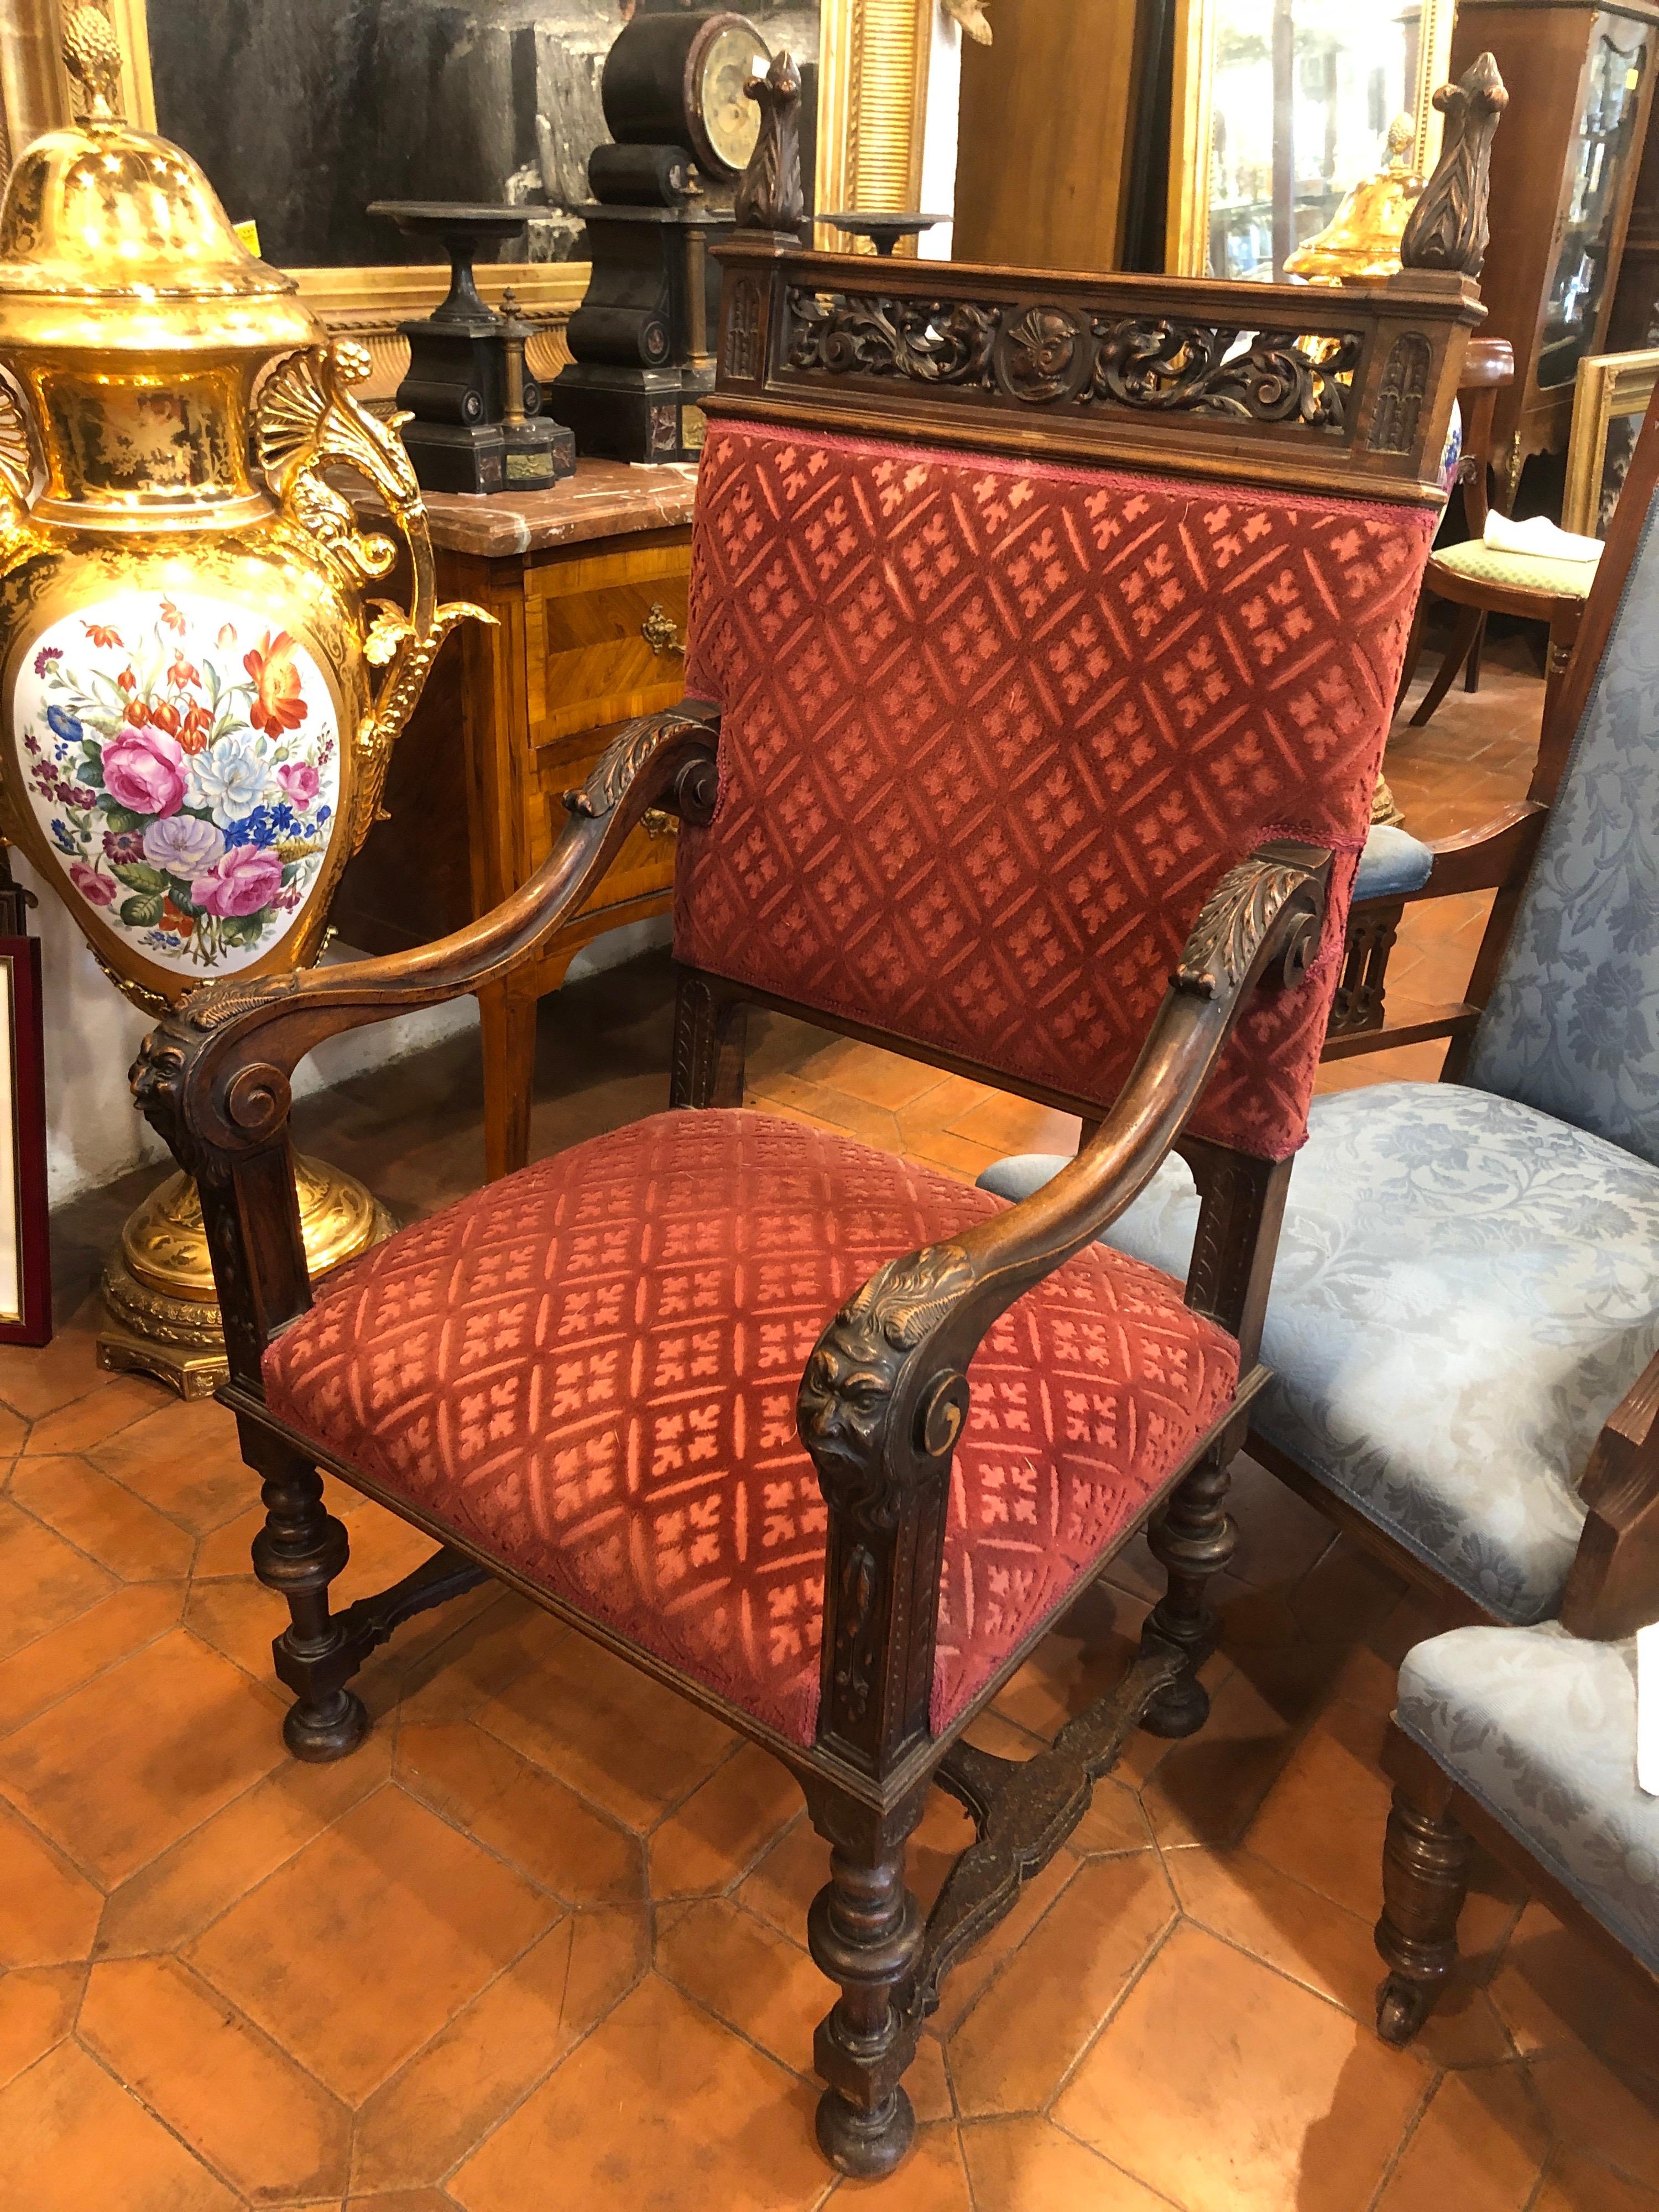 Fantastic Italian armchair, 1760-1770, northern Italy, made of walnut and carved in an exceptional way. Perfect.